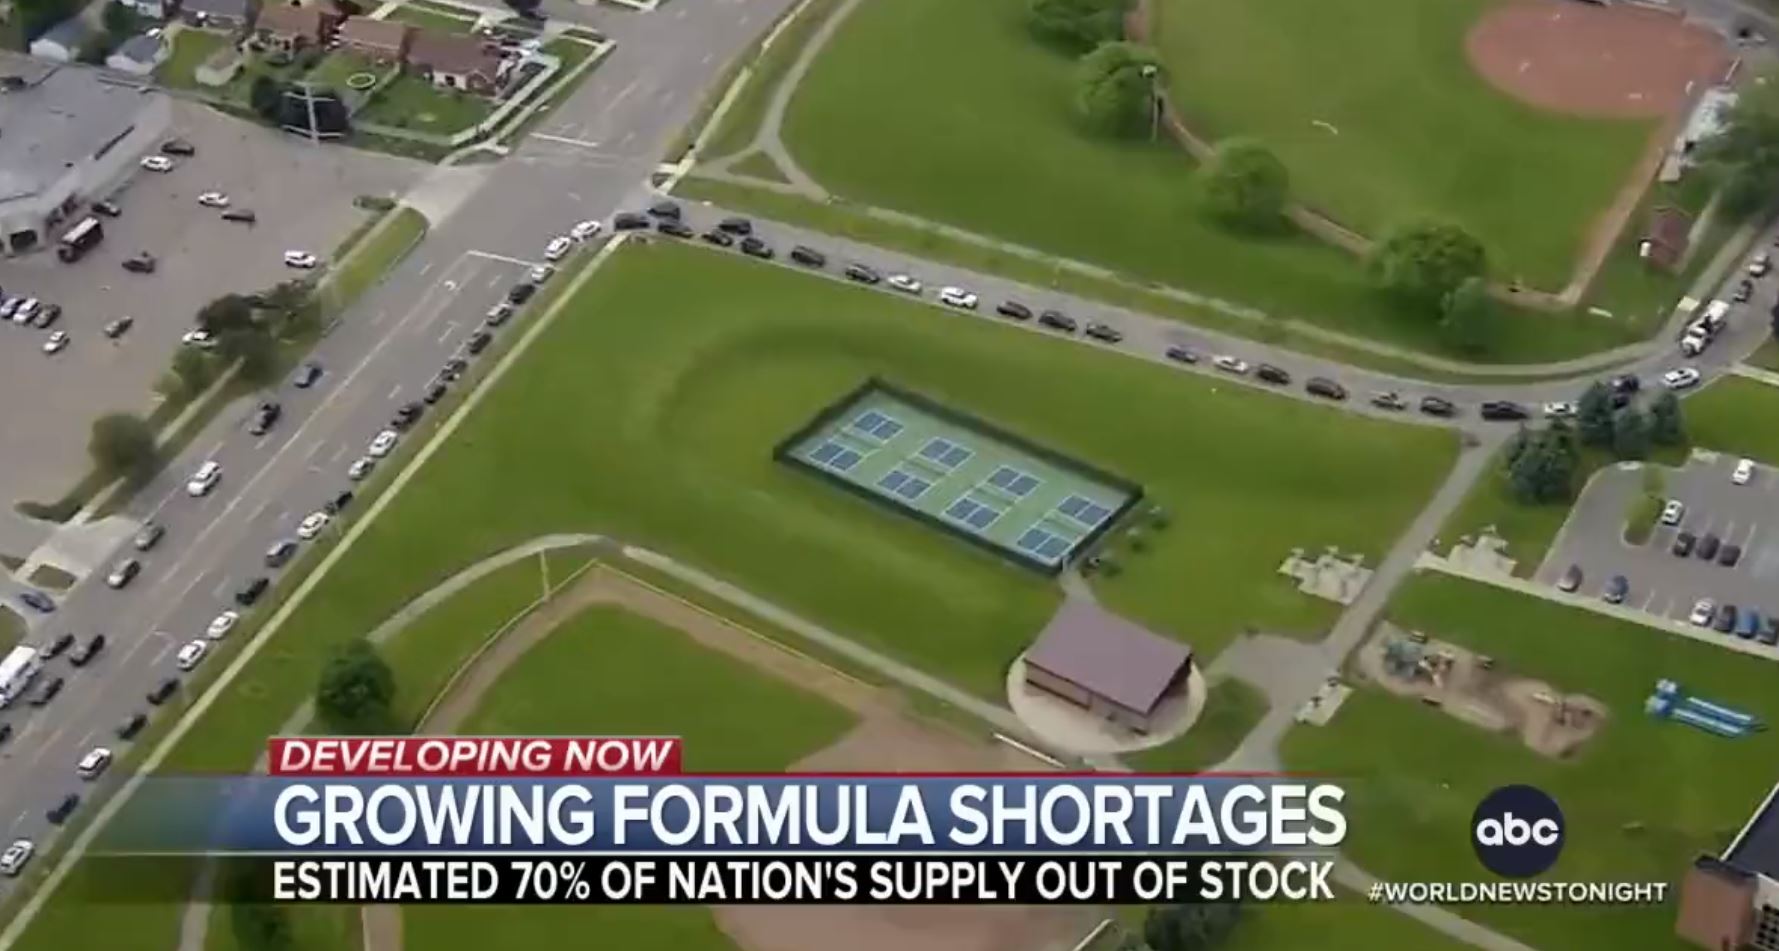 UPDATE: Mile-Long Line of Cars to Pick Up Baby Formula in Michigan as Biden’s Baby Formula Crisis Continues (Video)